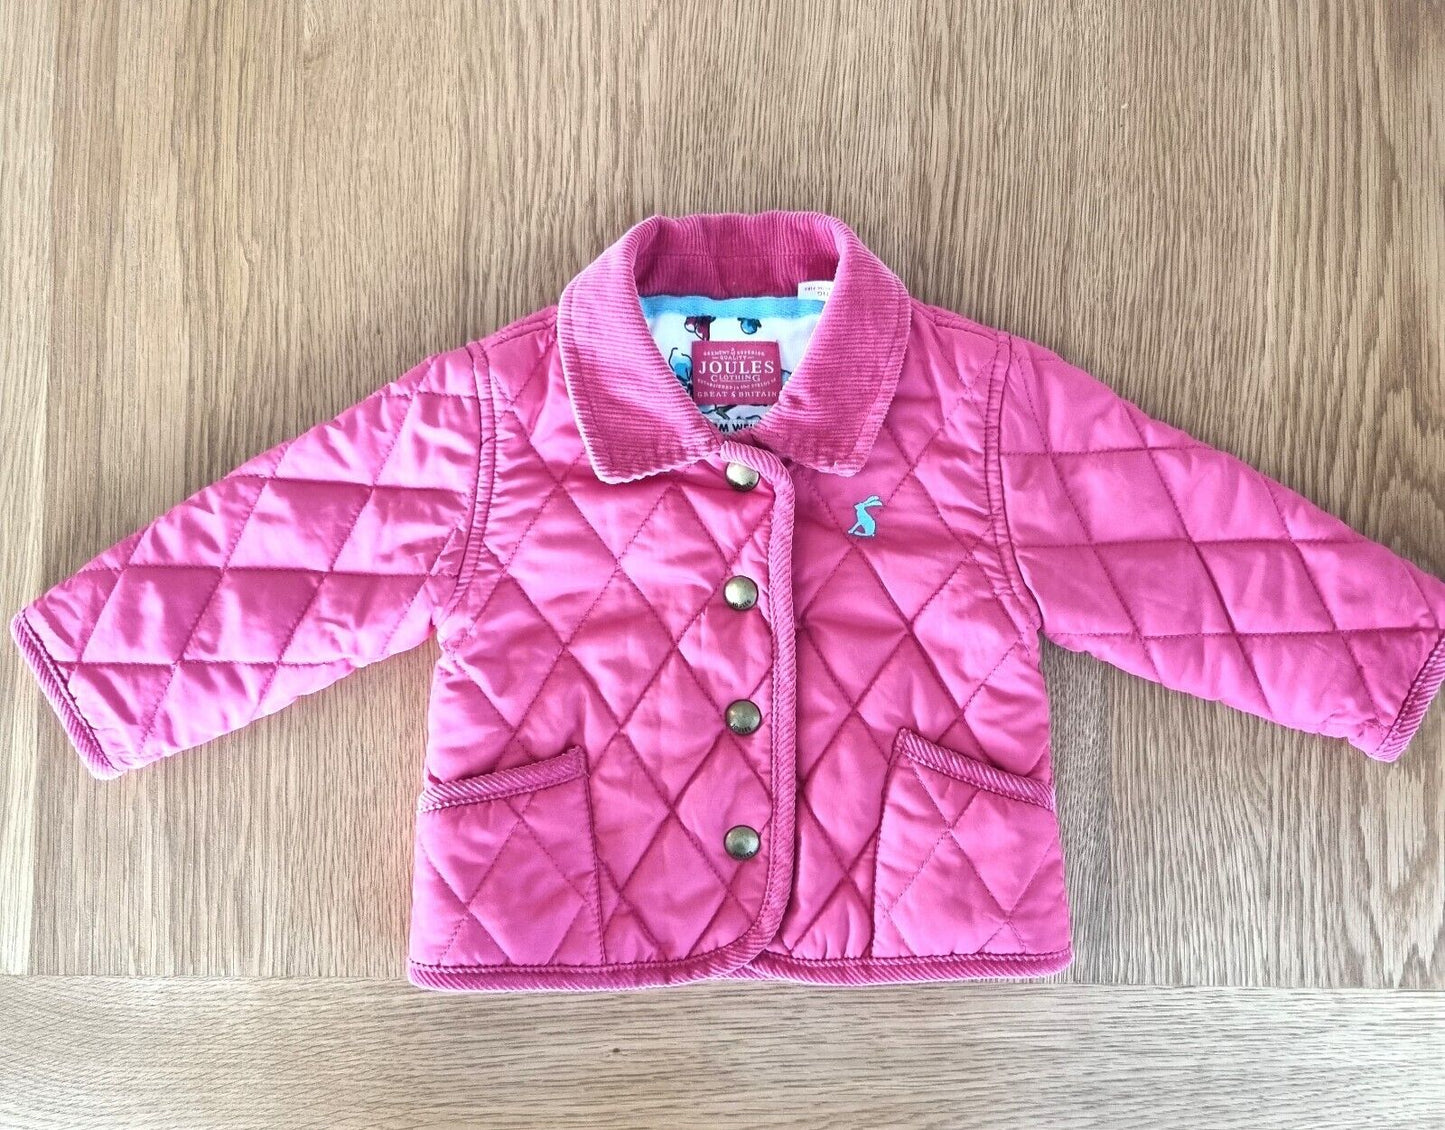 Girls Joules Quilted Coat Age 0-3 Months Pink Poppers Excellent Condition - Bonnie Lassio